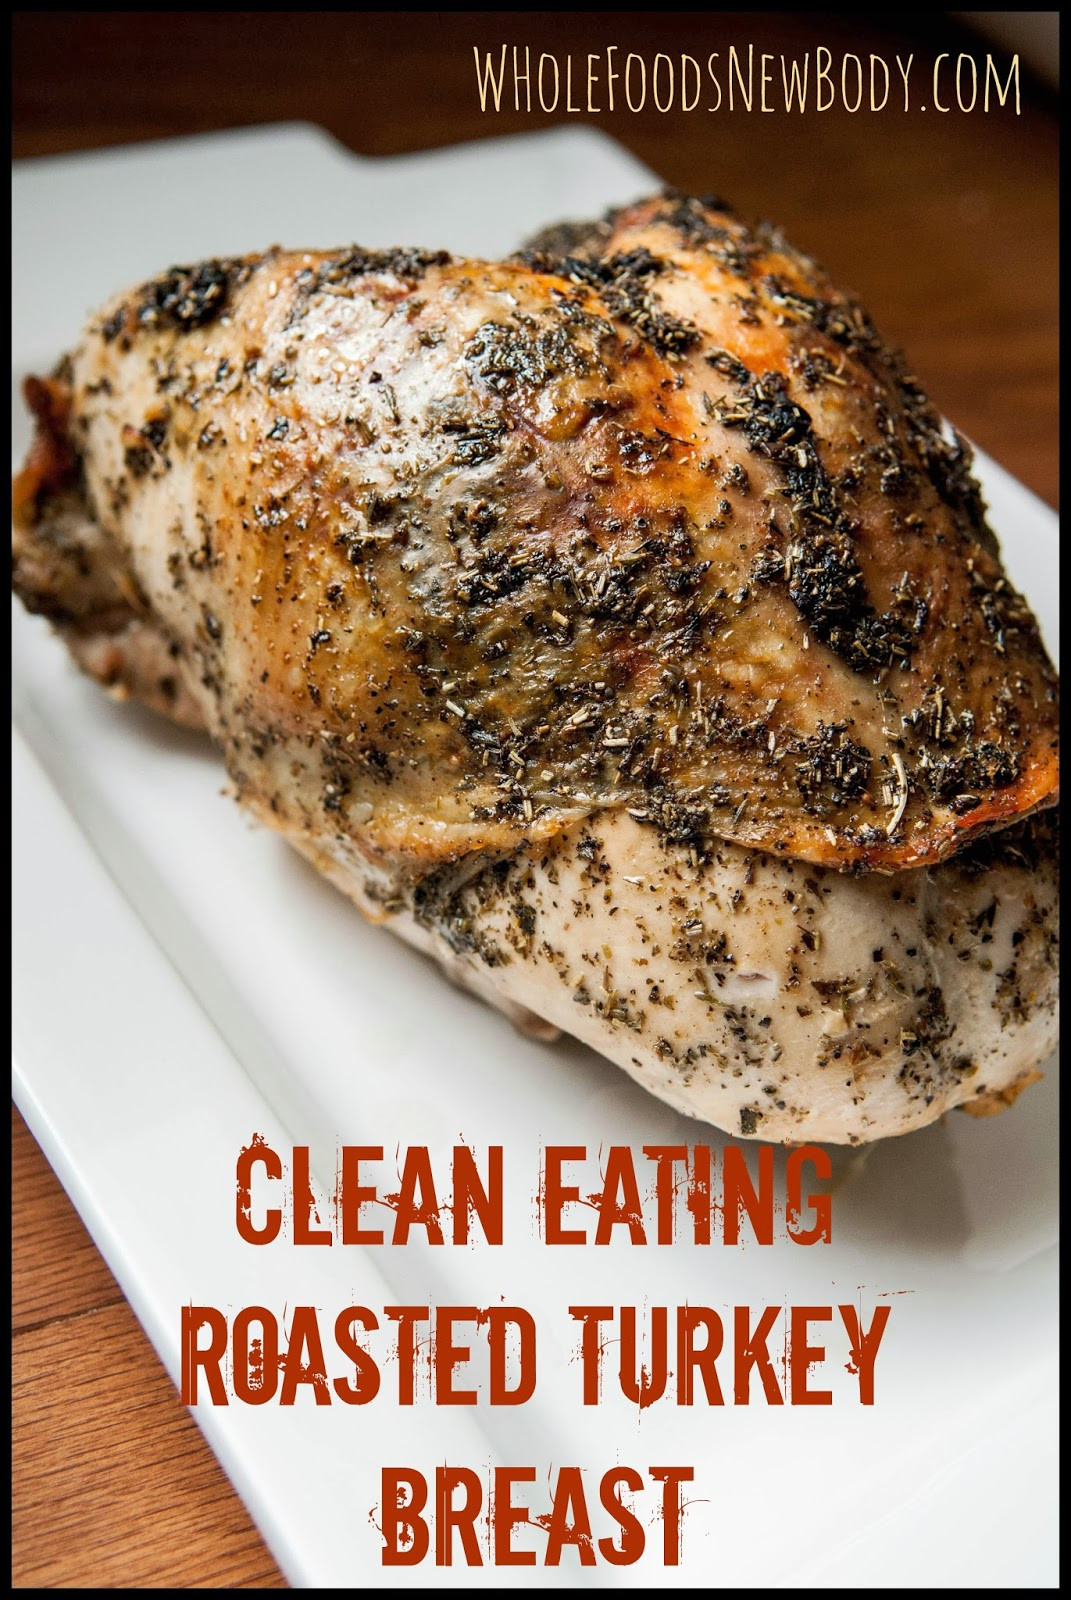 Whole Foods Thanksgiving Turkey
 Whole Foods New Body Clean Eating Roasted Turkey Breast